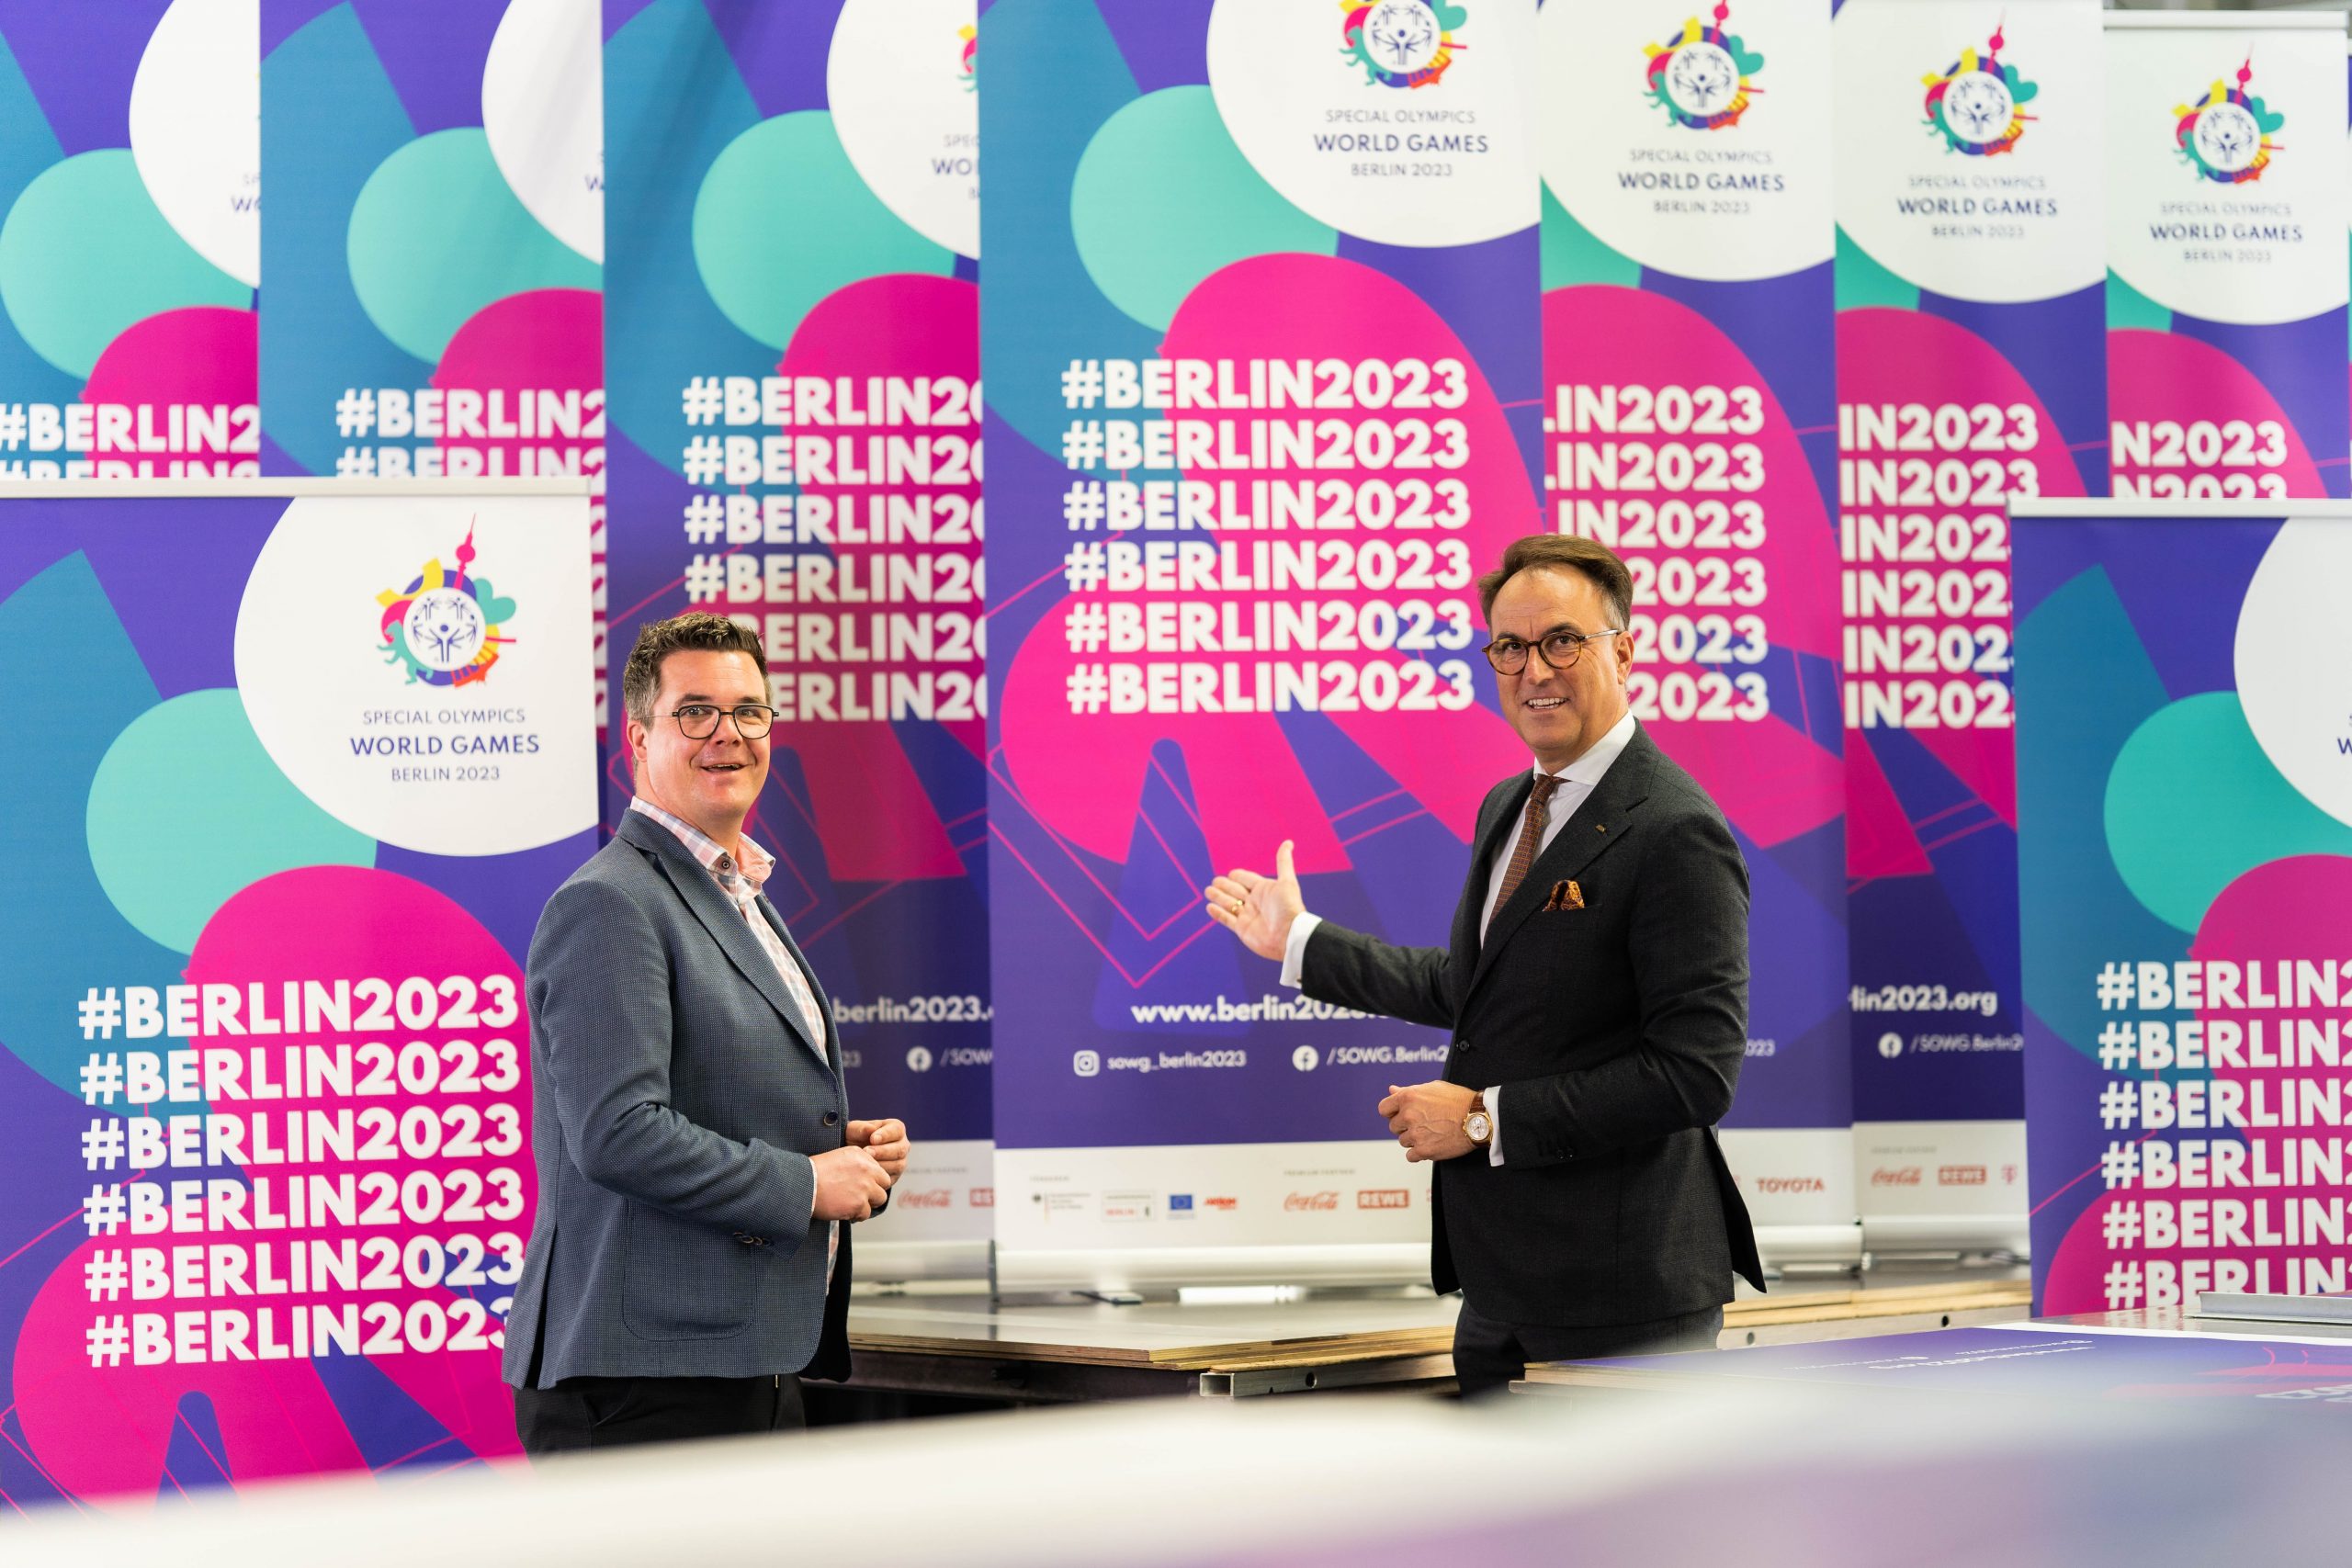 Special Olympics World Games 2023 Neuwied has special significance